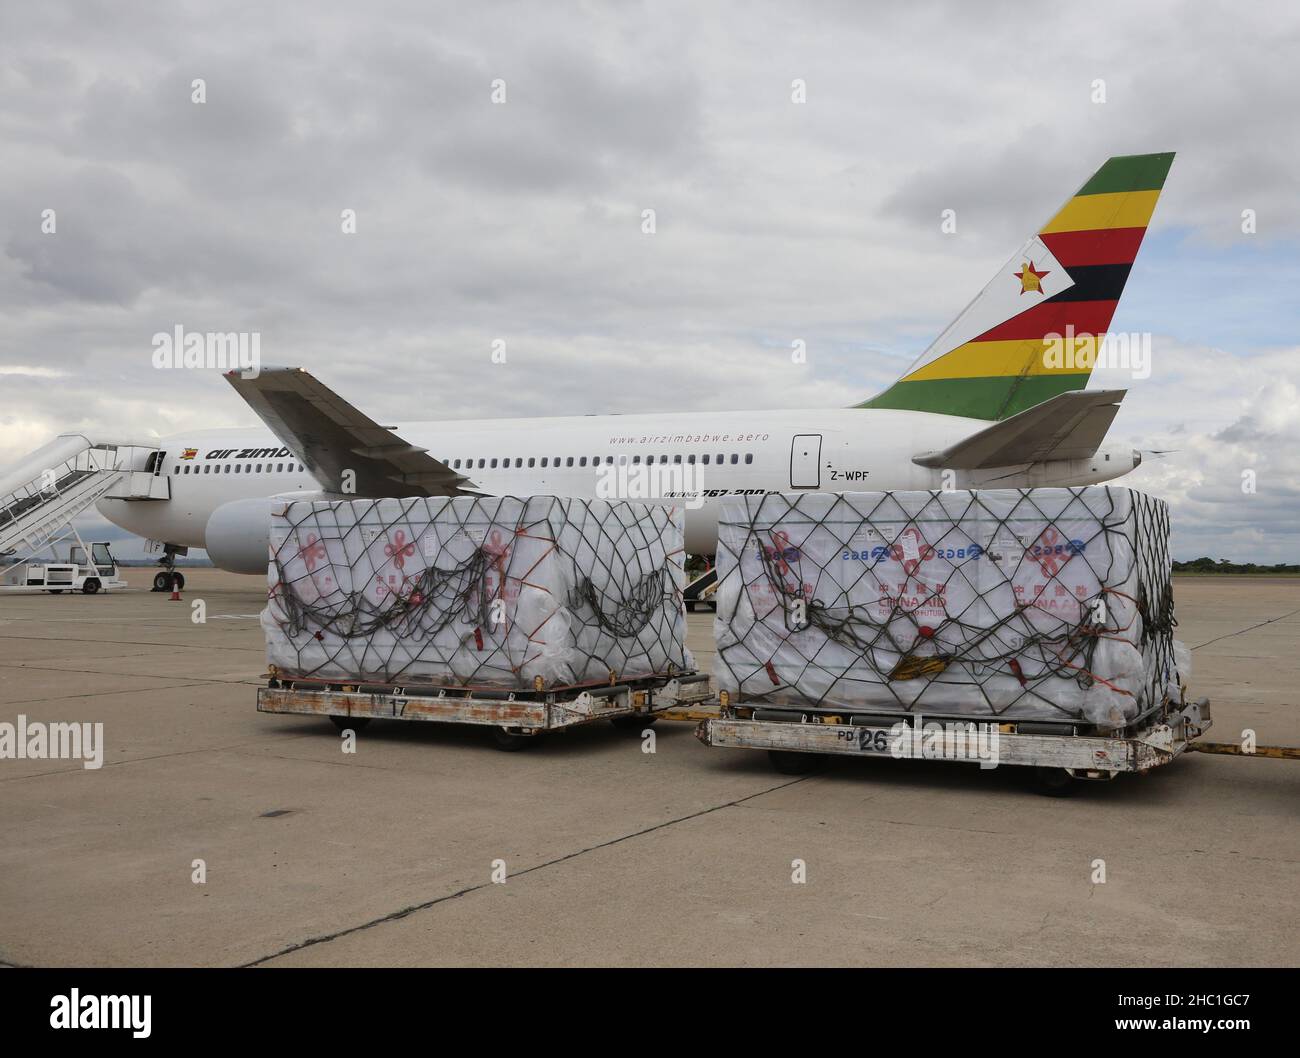 Harare, Zimbabwe. 20th Dec, 2021. A batch of COVID-19 vaccine donated by China arrives at Robert Gabriel Mugabe International Airport in Harare, Zimbabwe, on Dec. 20, 2021. Zimbabwe on Monday received a batch of Sinovac COVID-19 vaccine donated by China, which will boost the country's vaccination campaign as it battles the fourth wave of COVID-19 pandemic. Credit: Zhang Yuliang/Xinhua/Alamy Live News Stock Photo